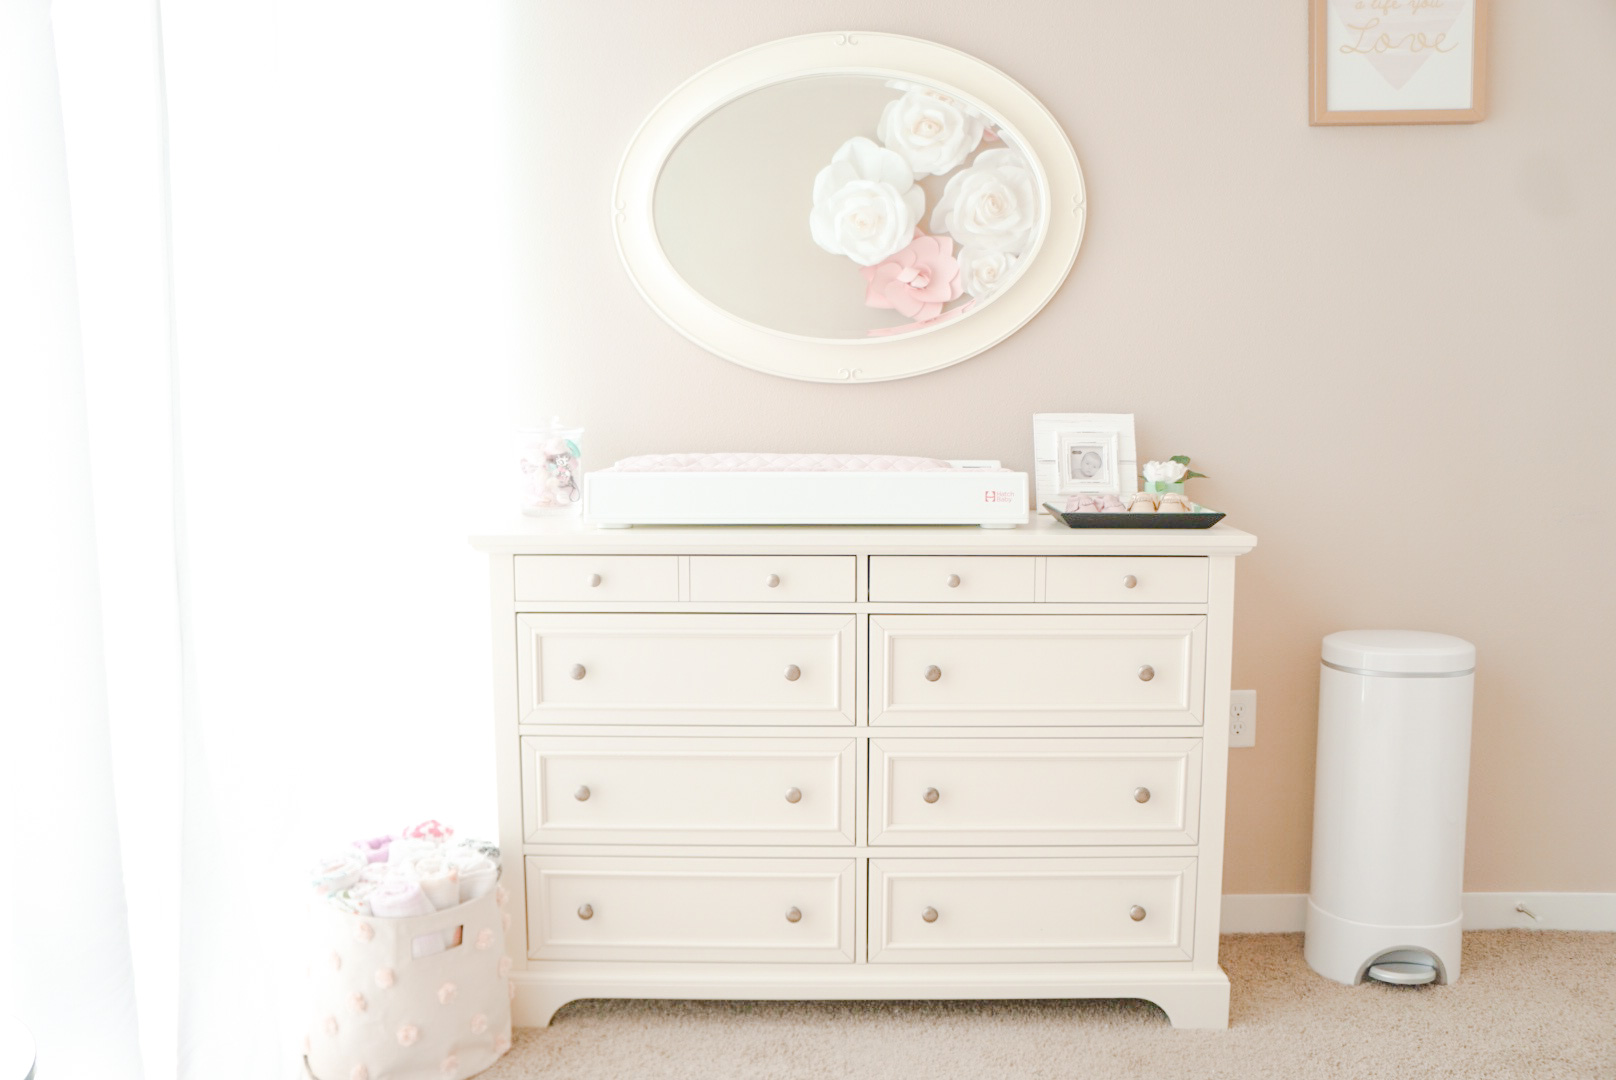 Lifestyle Blogger Katelyn Jones of A Touch of Pink shares her Baby Girl's Nursery Changing Table from Wayfair